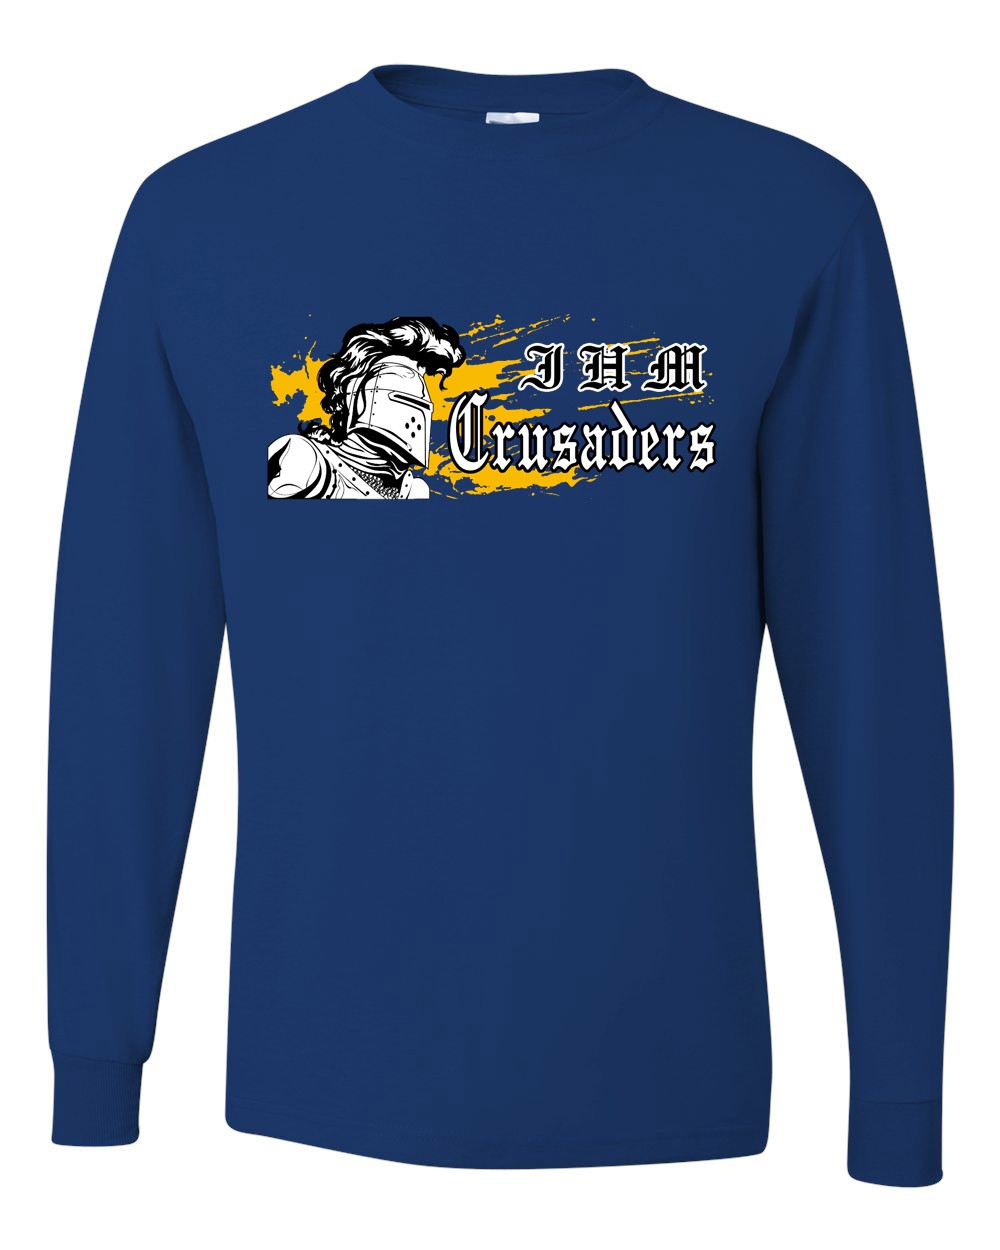 IHM Spirit L/S T-Shirt w/ Crusader Logo - Please Allow 2-3 Weeks for Delivery